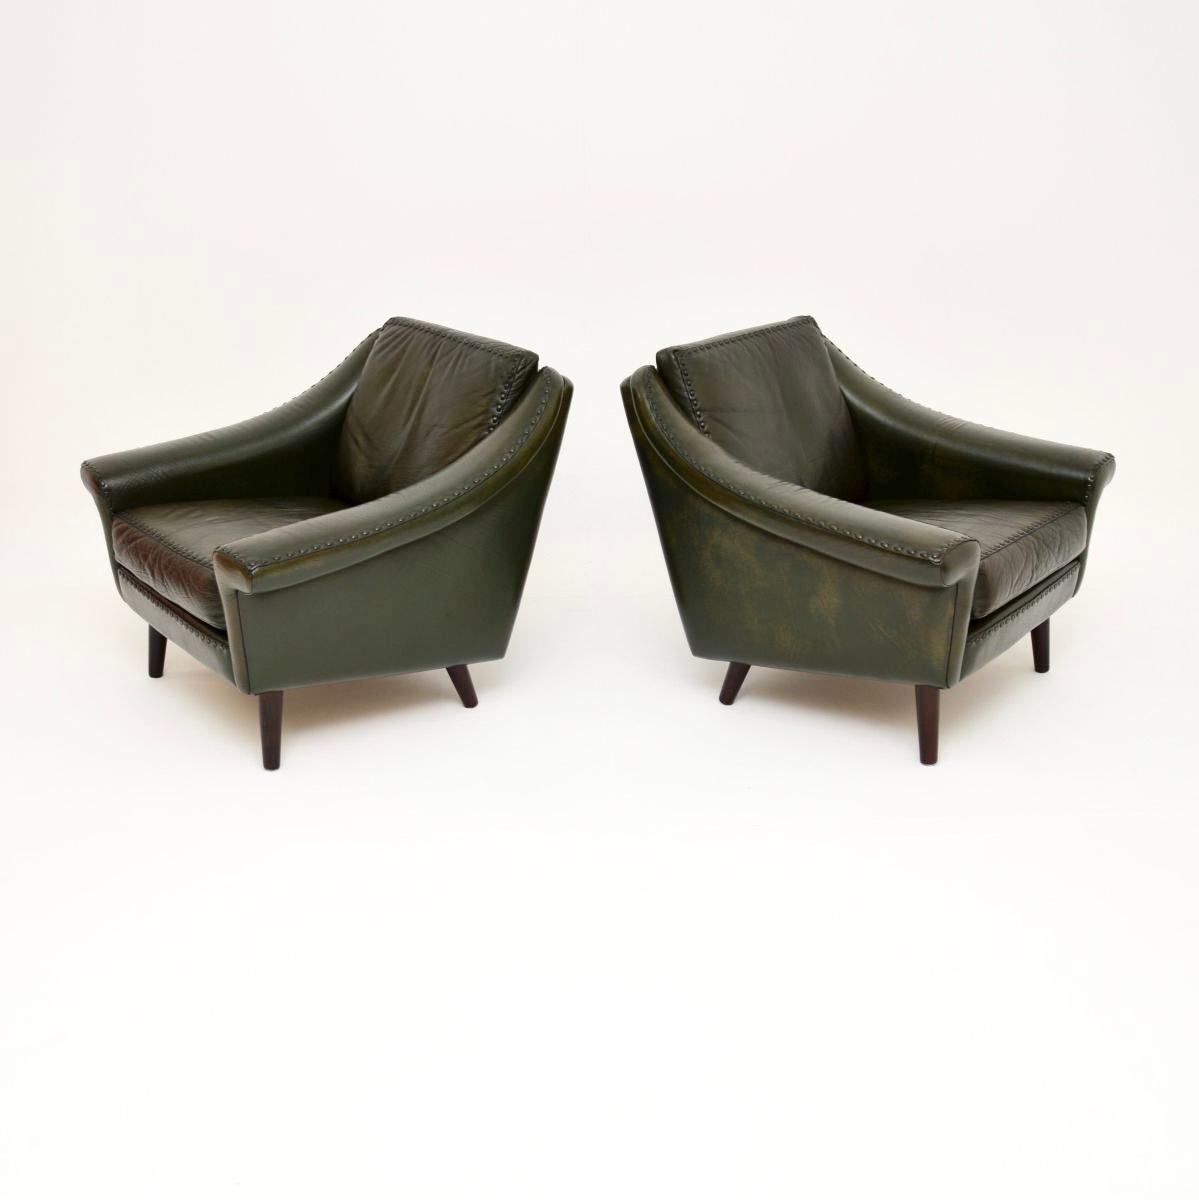 Pair of Danish Vintage Leather Matador Armchairs by Aage Christiansen In Good Condition For Sale In London, GB